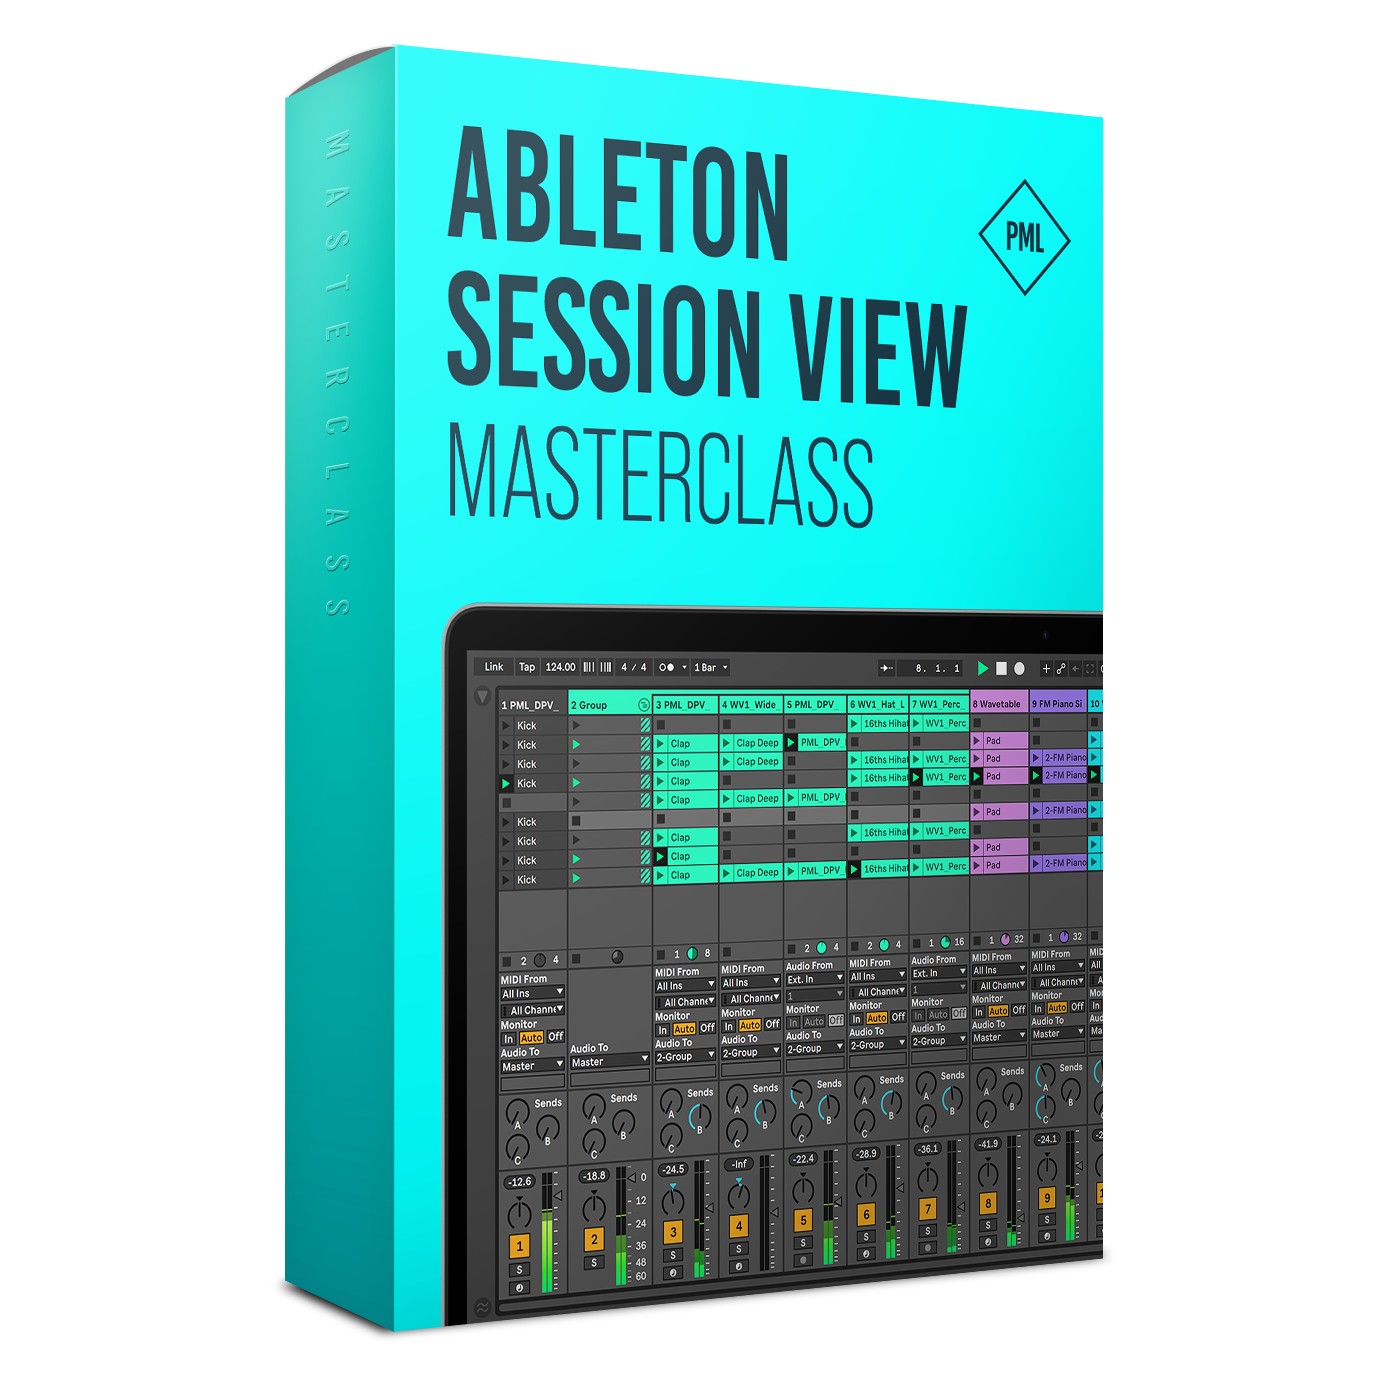 Ableton Session View Masterclass